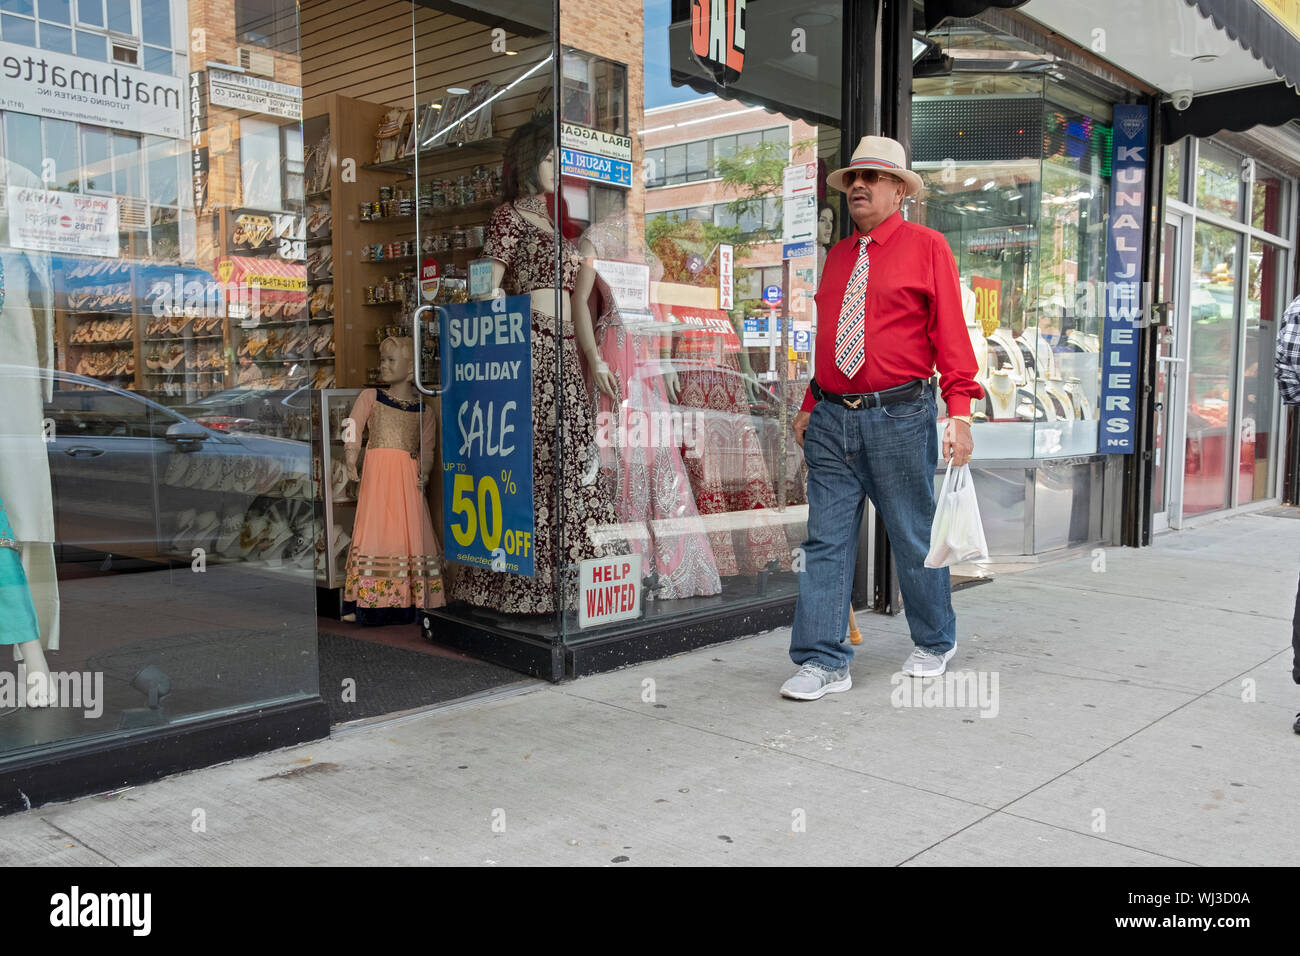 A man in a bright red shirt walks by a sari shop on 74th Street in the very diverse Jackson Heights, Queens, New York City. Stock Photo